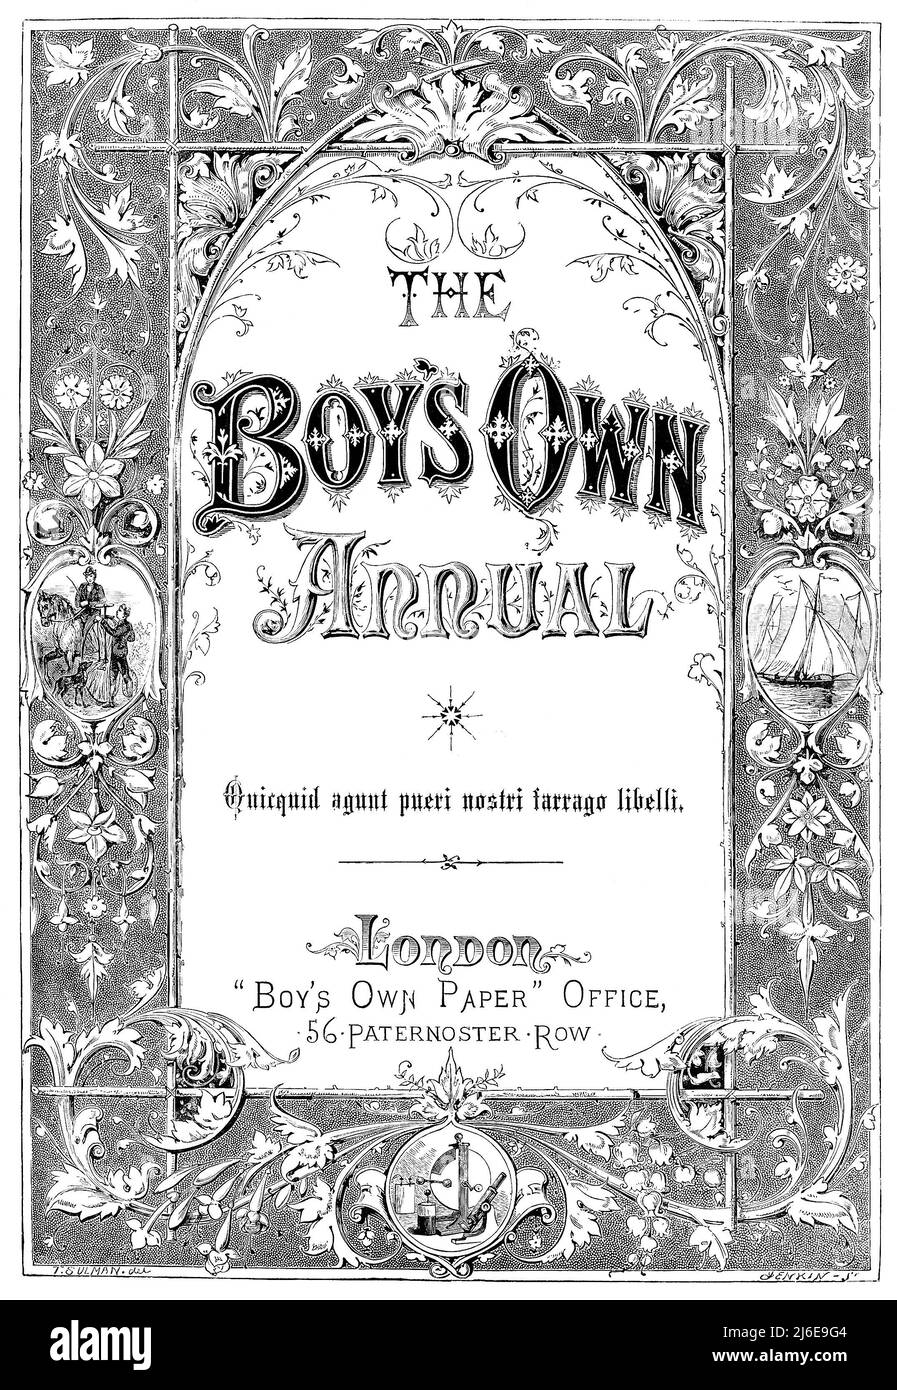 Vintage frontispiece of the Boy's Own Annual. The design was used over many Victorian era annuals. Stock Photo